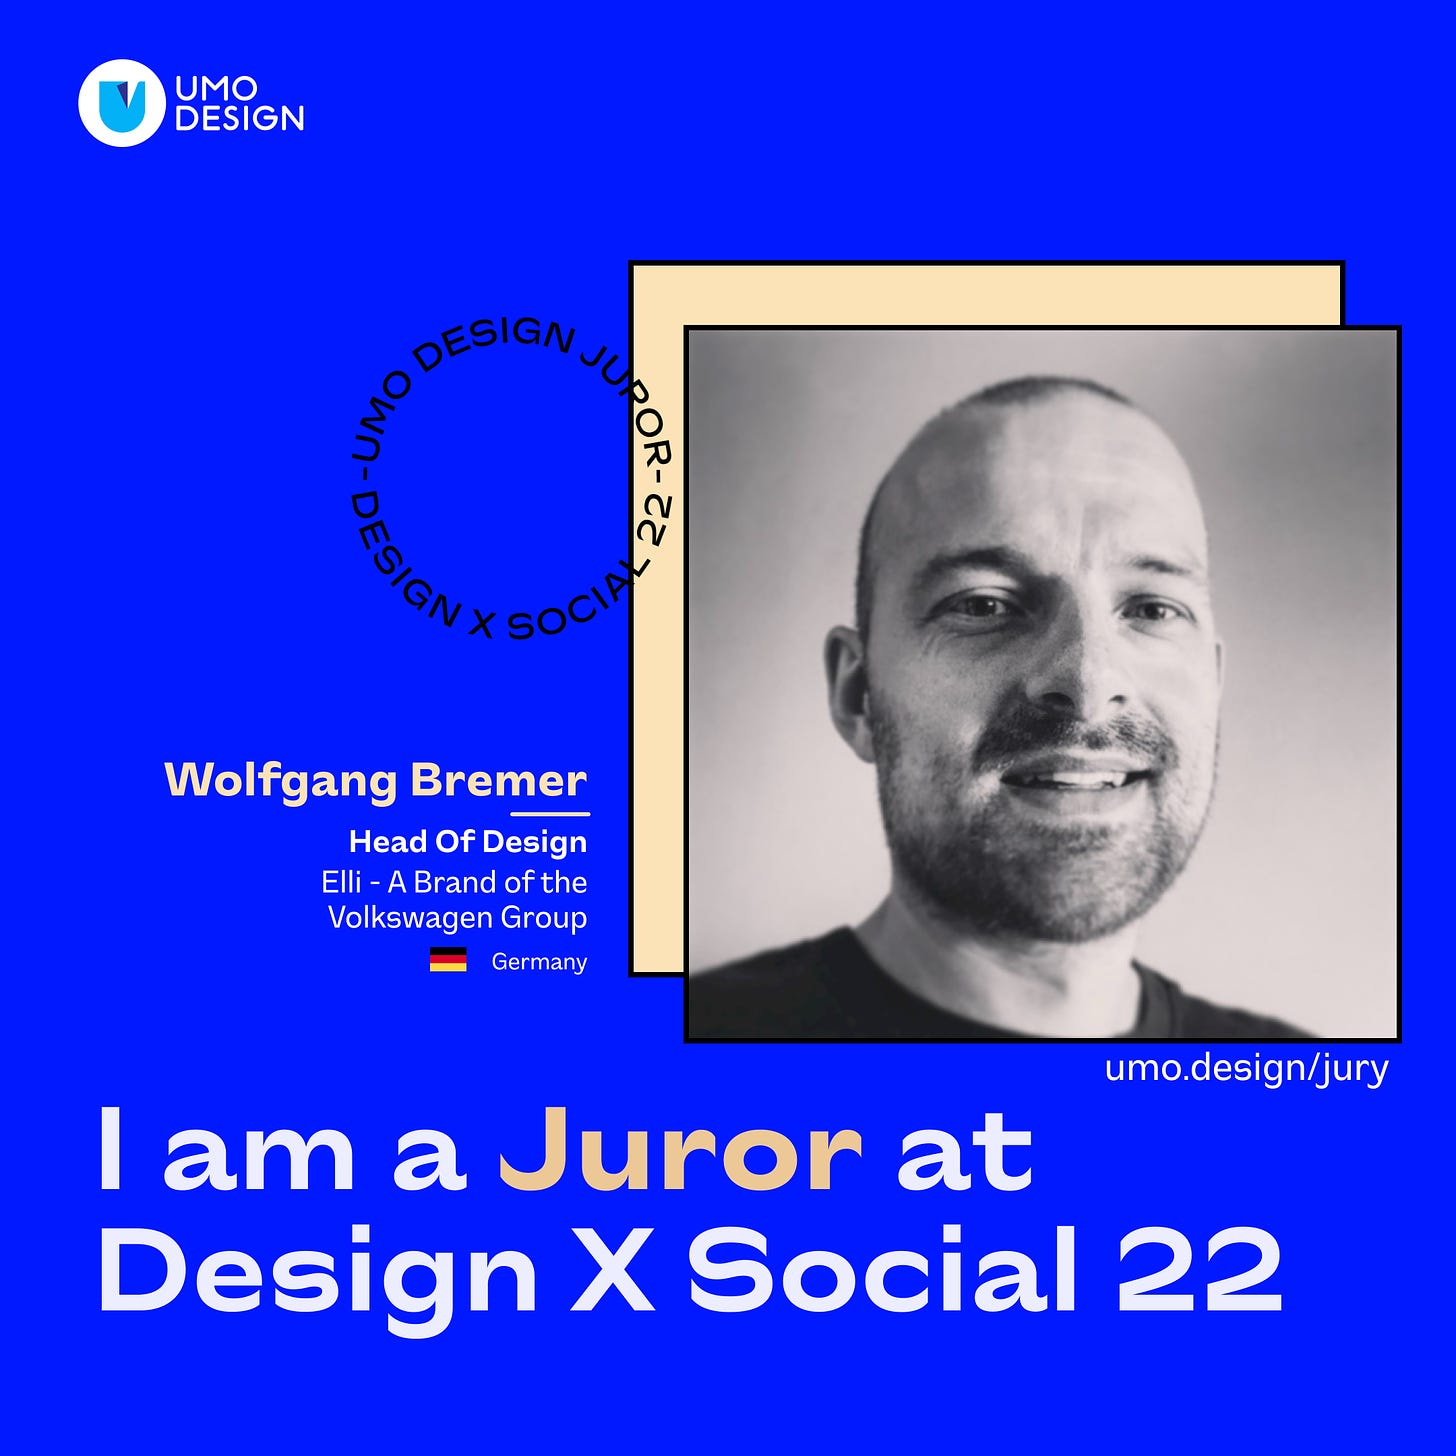 Wolfgang Bremer is a jury member for the UMO Design X Social Global Innovation Challenge 2022